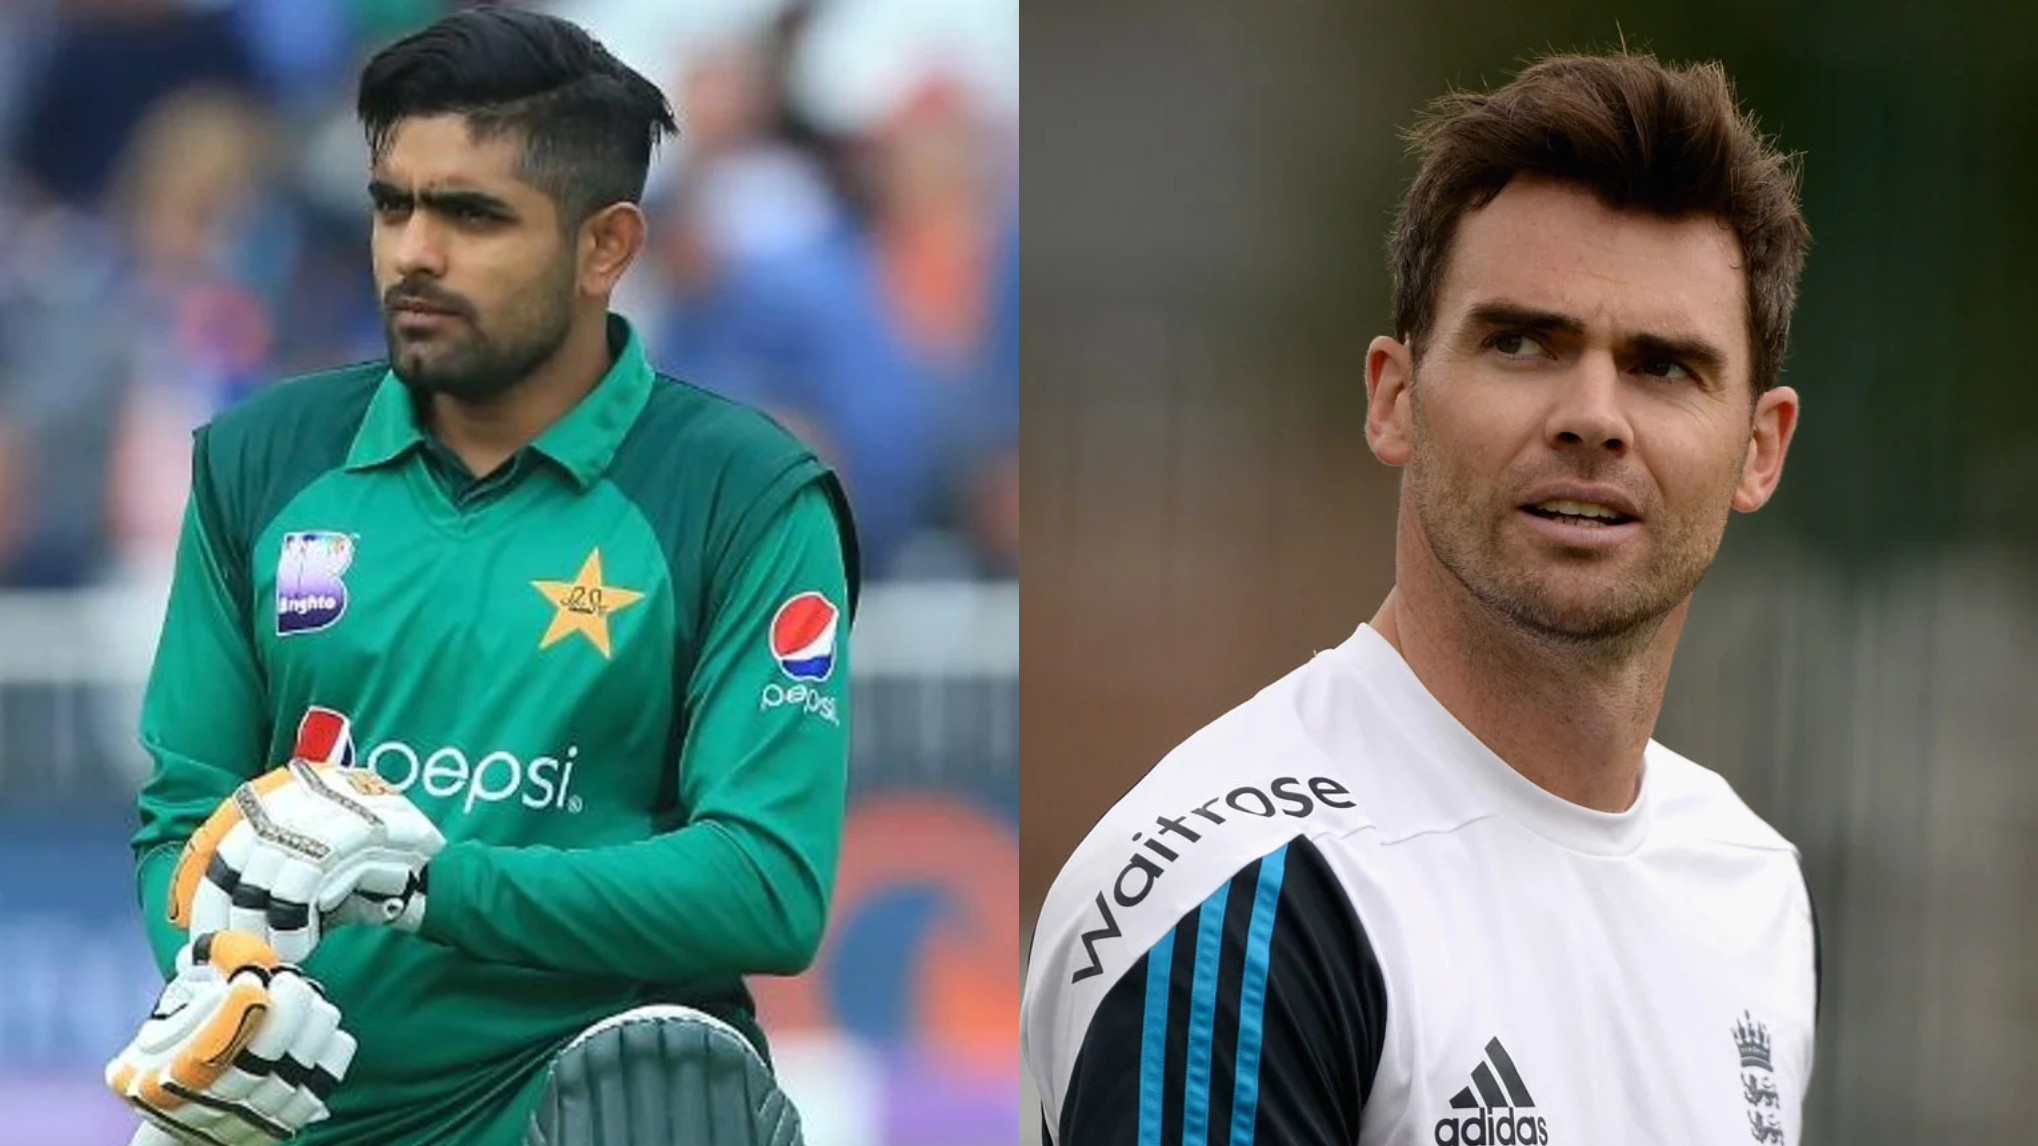 'I’ll pay double for him'- James Anderson surprised with Babar Azam going unsold in the Hundred